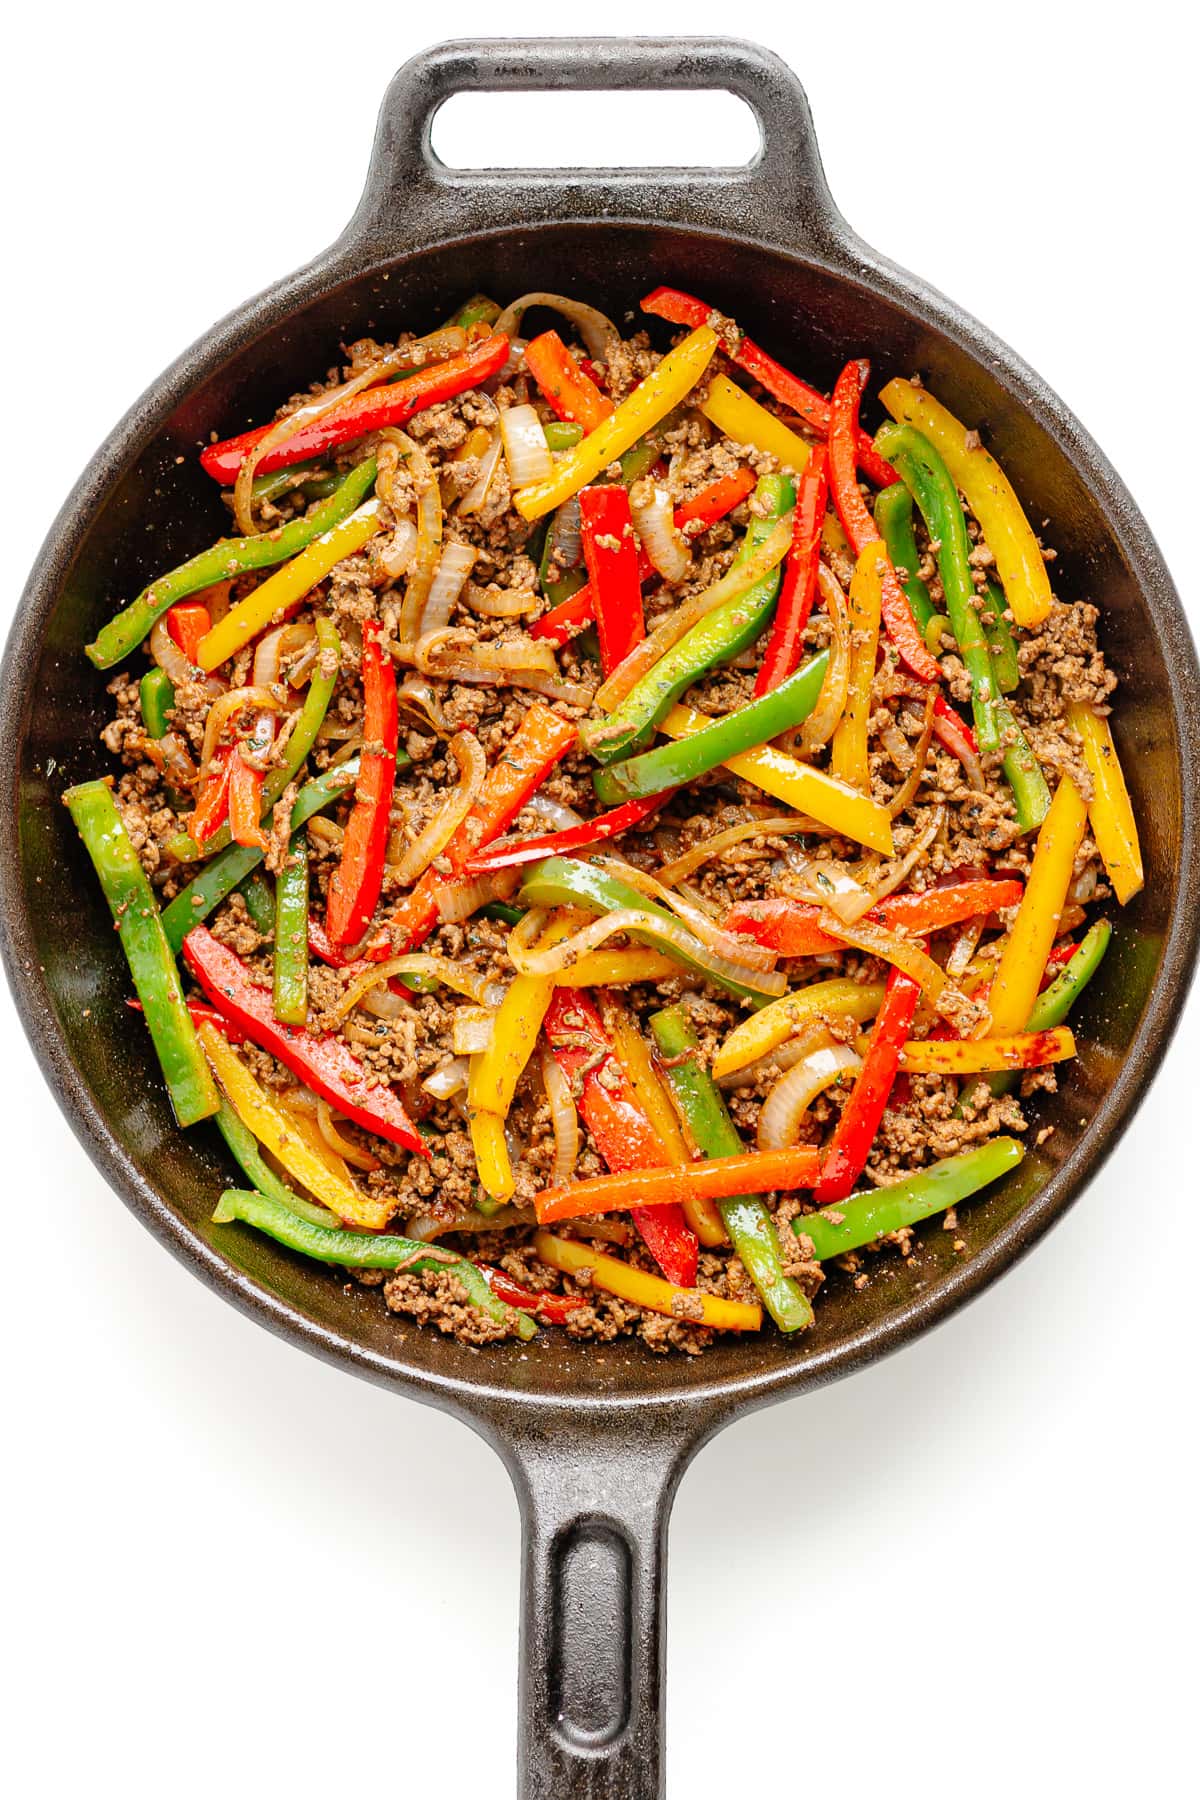 Seasoned ground beef and fajita veggies in a cast iron skillet on a white background.